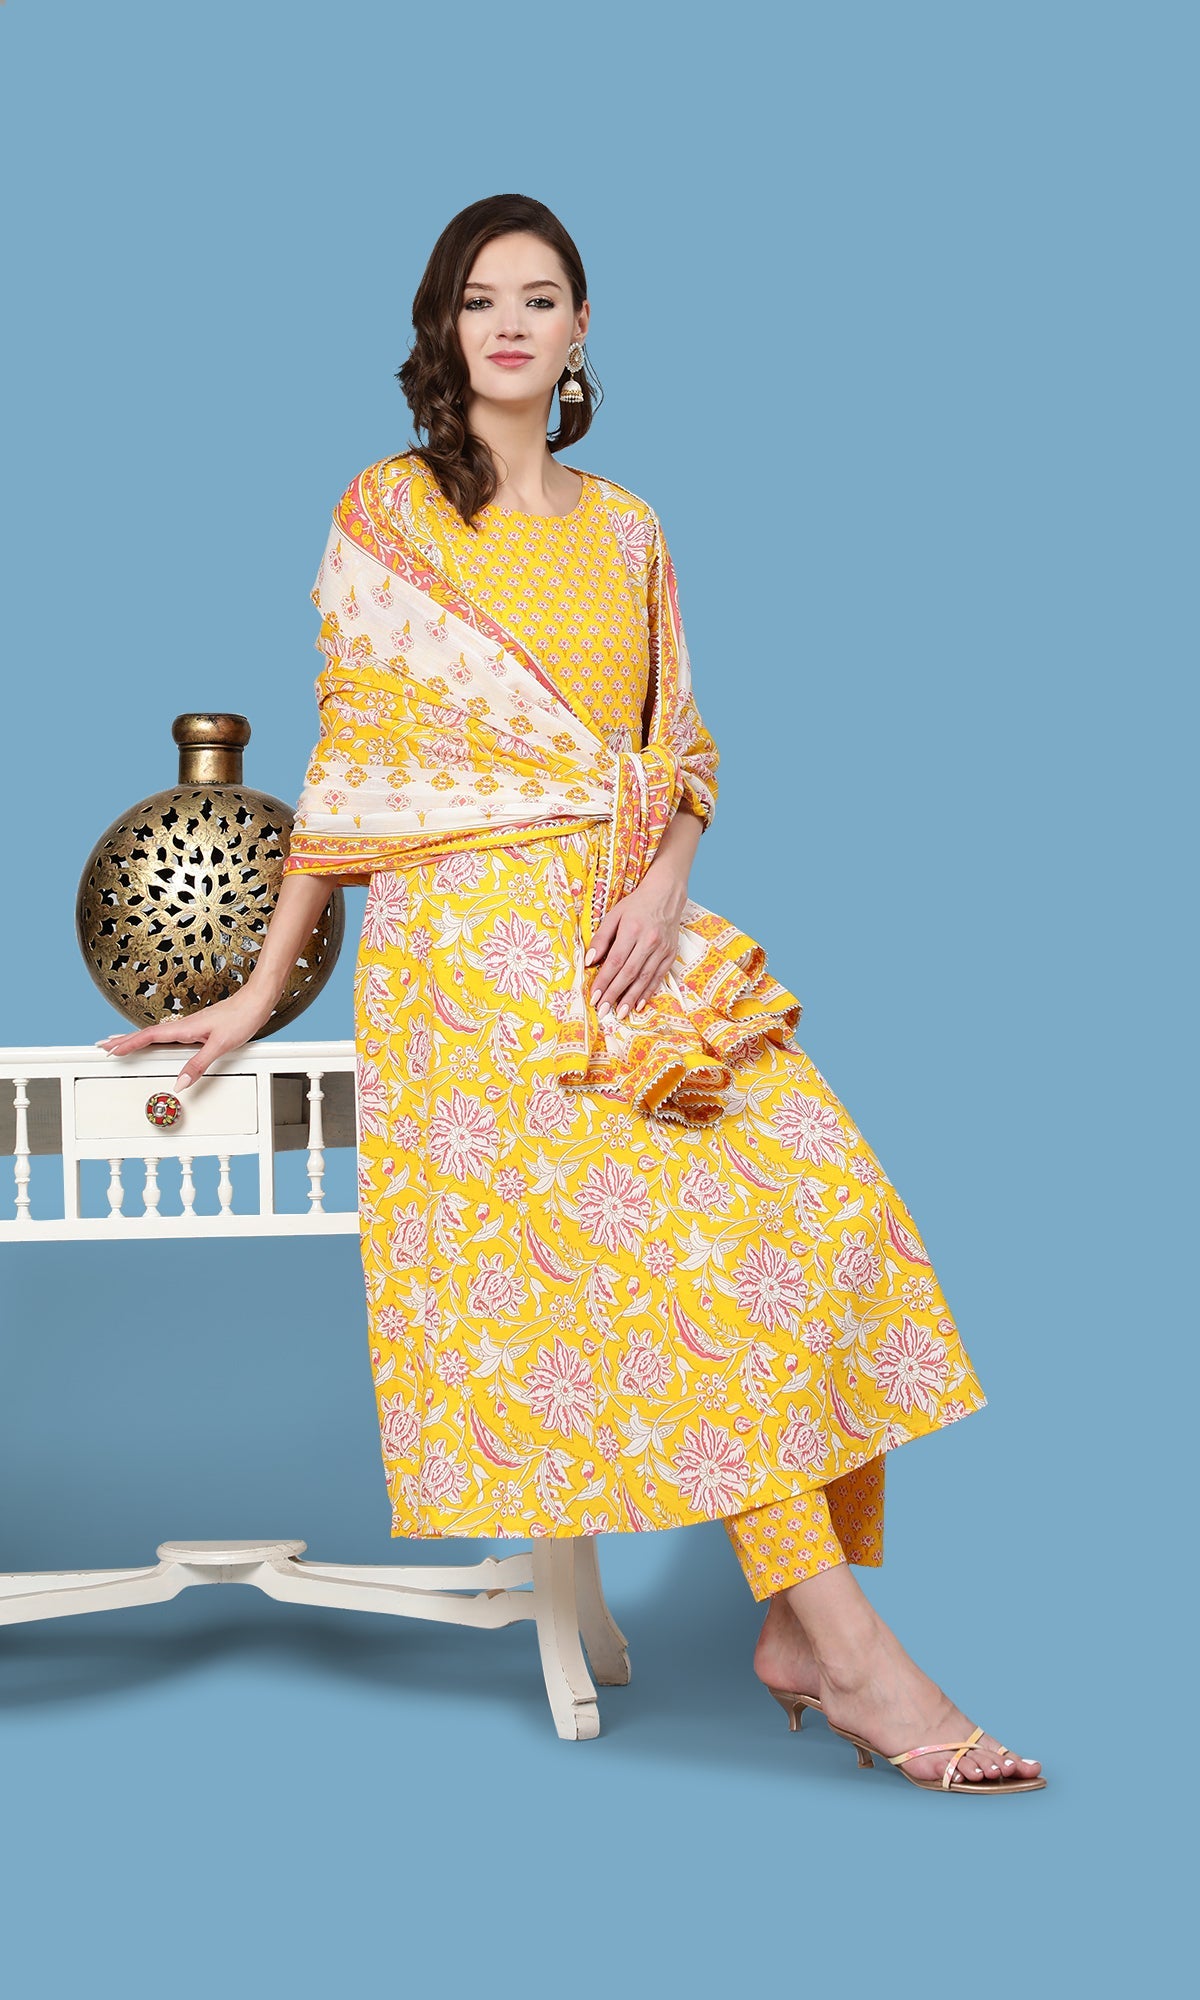 Yelllow Ethnic Printed Flared Kurta With Trouser And Dupatta